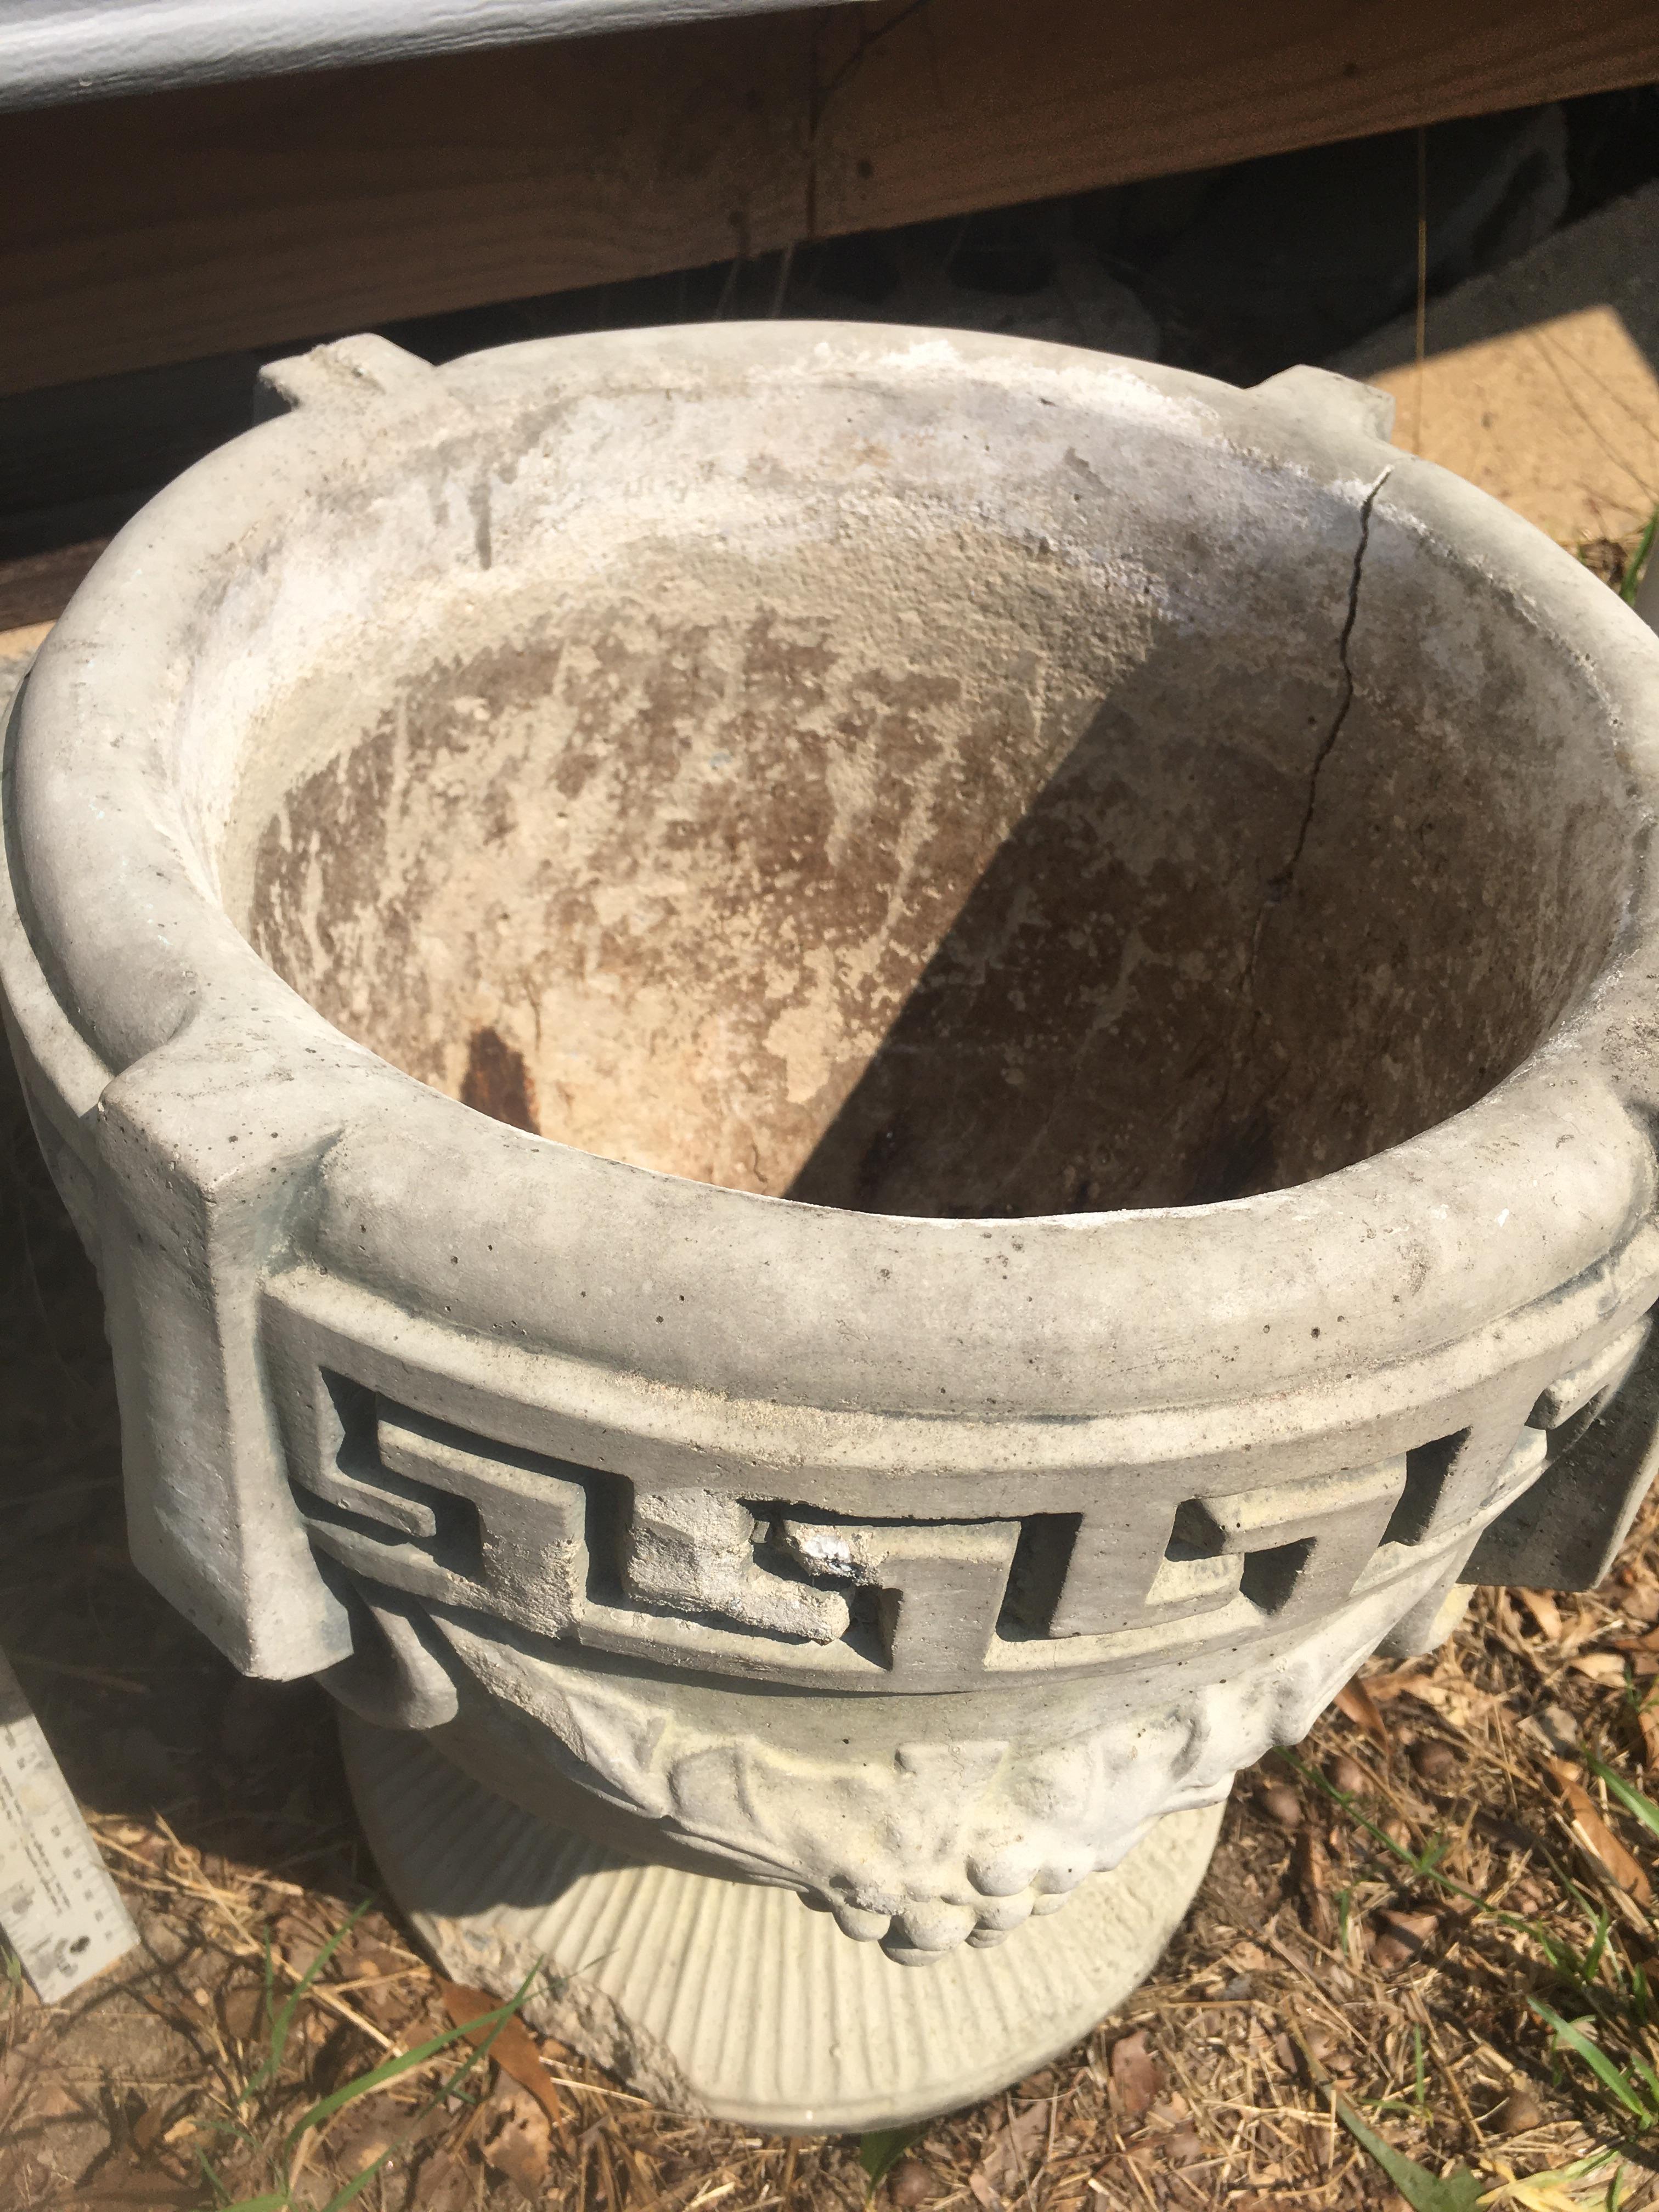 (2) Approx 18 inch Tall Concrete Planters